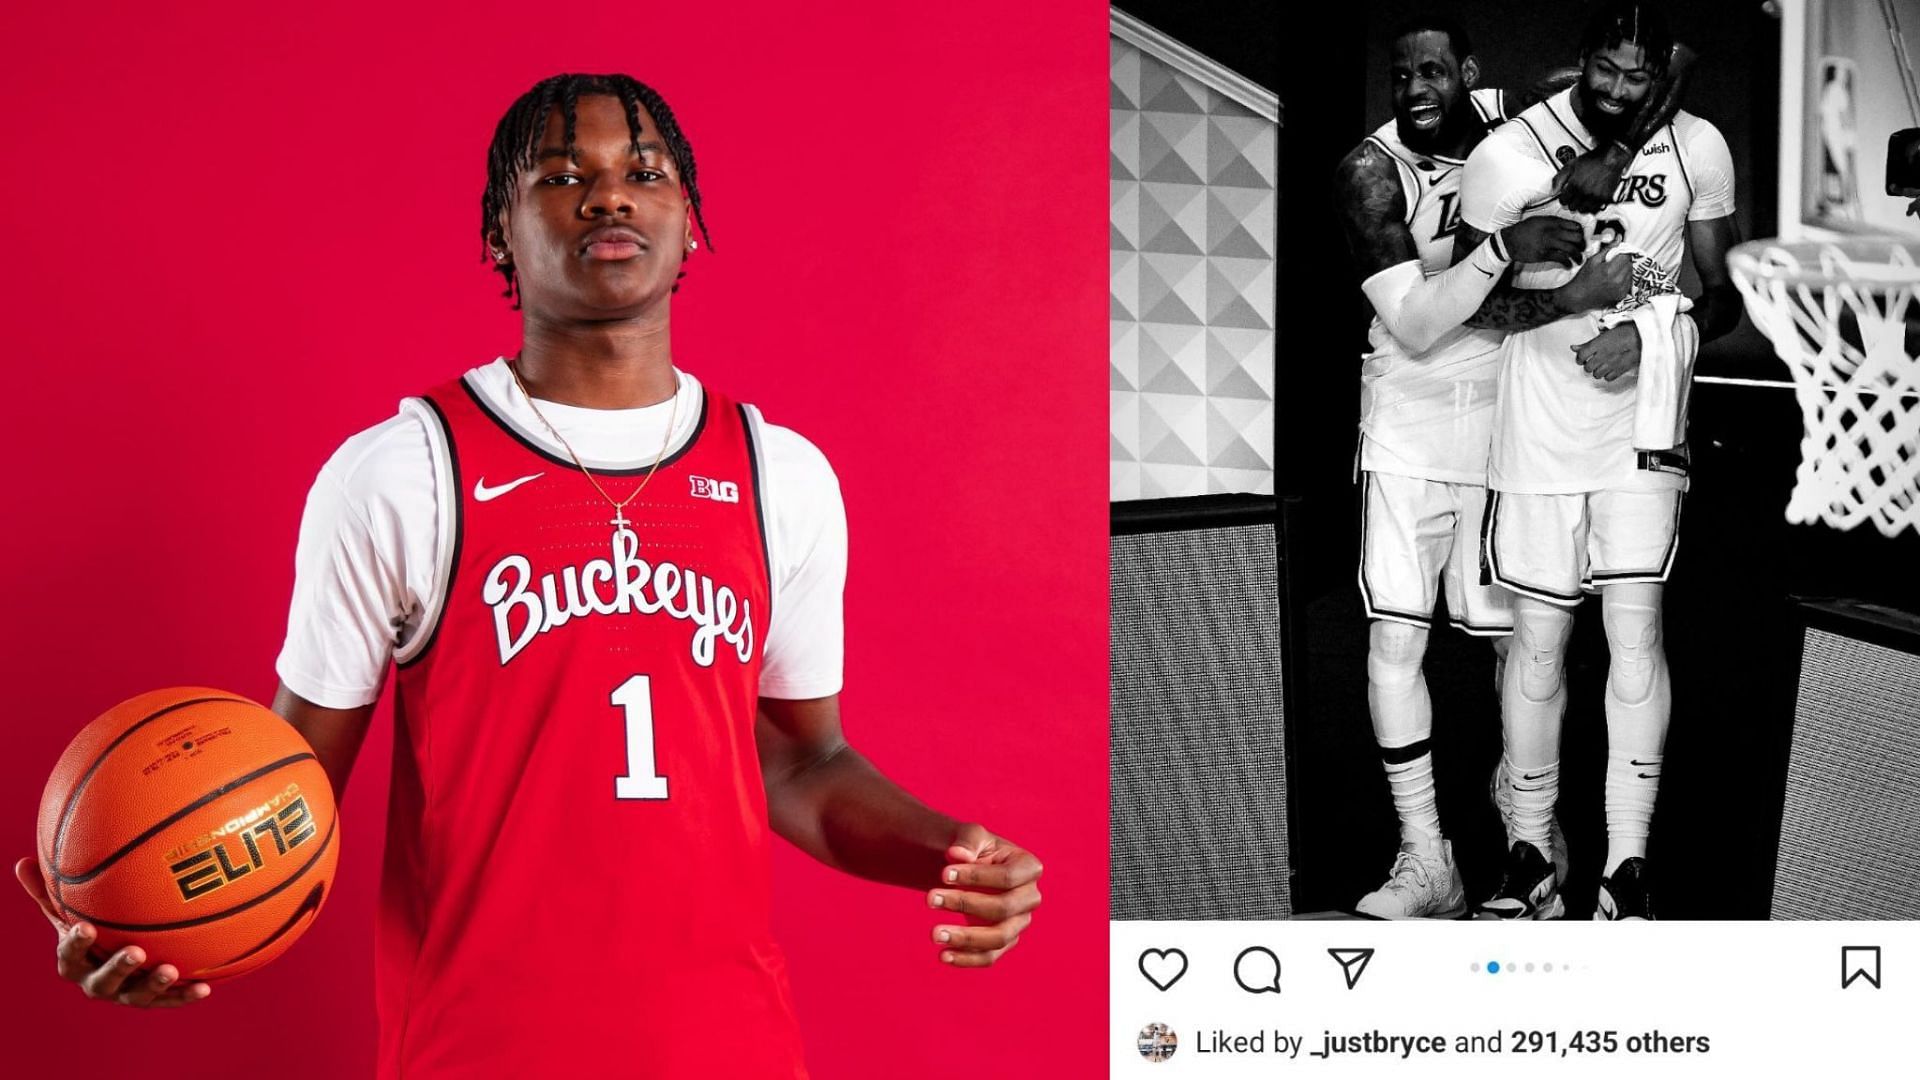 LeBron James&rsquo; younger son Bryce James likes IG montage hinting at Lakers